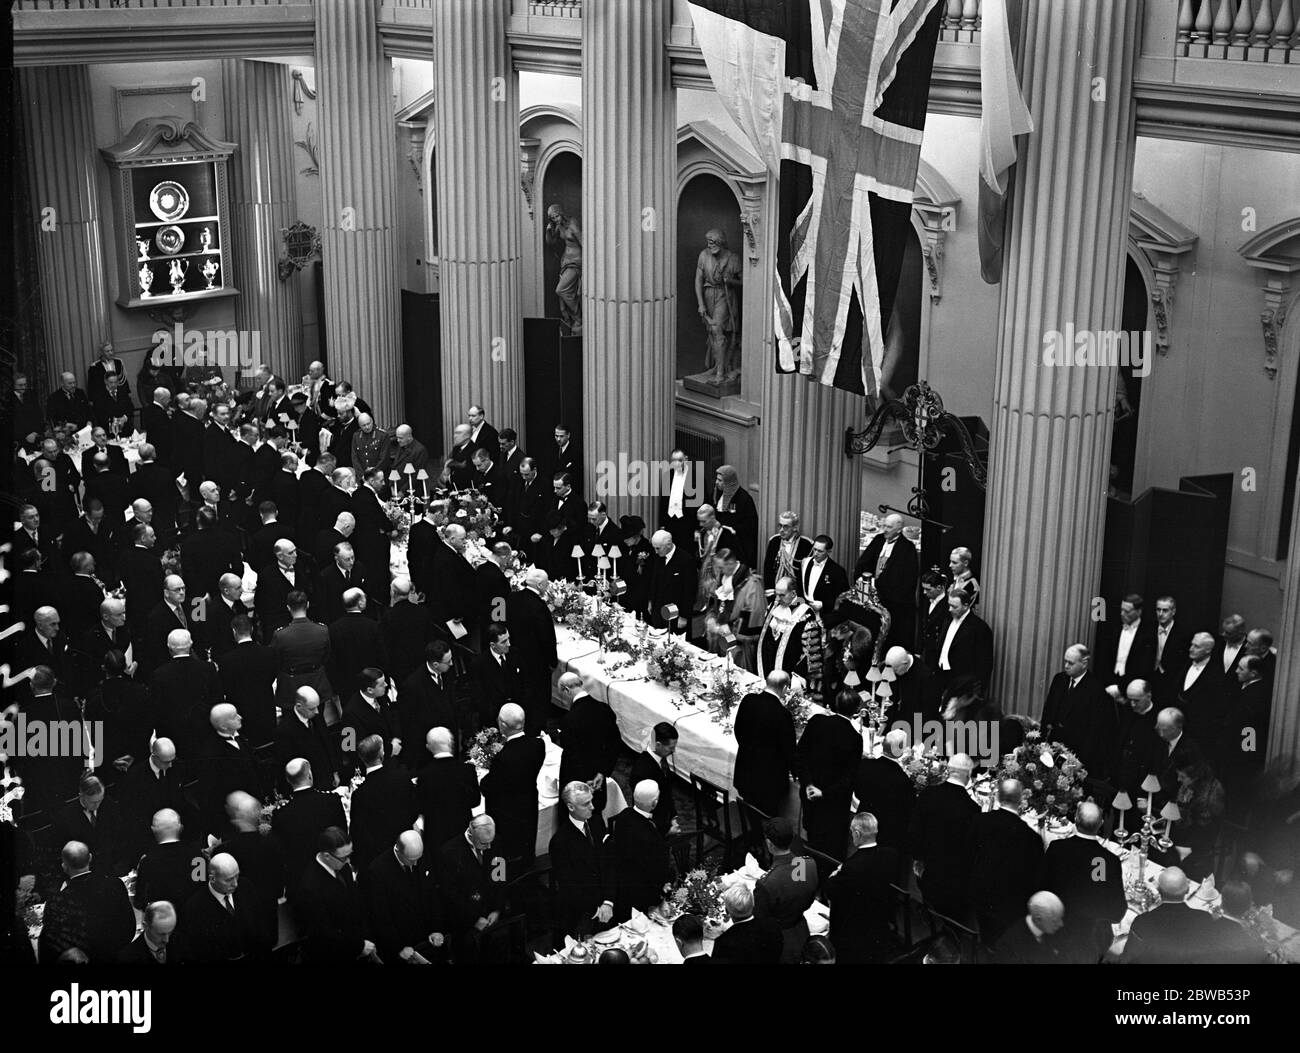 The Lord Mayor 's wartime lunch at the Mansion House , in place of the customary Guildhall banquet . 9 November 1939 Stock Photo